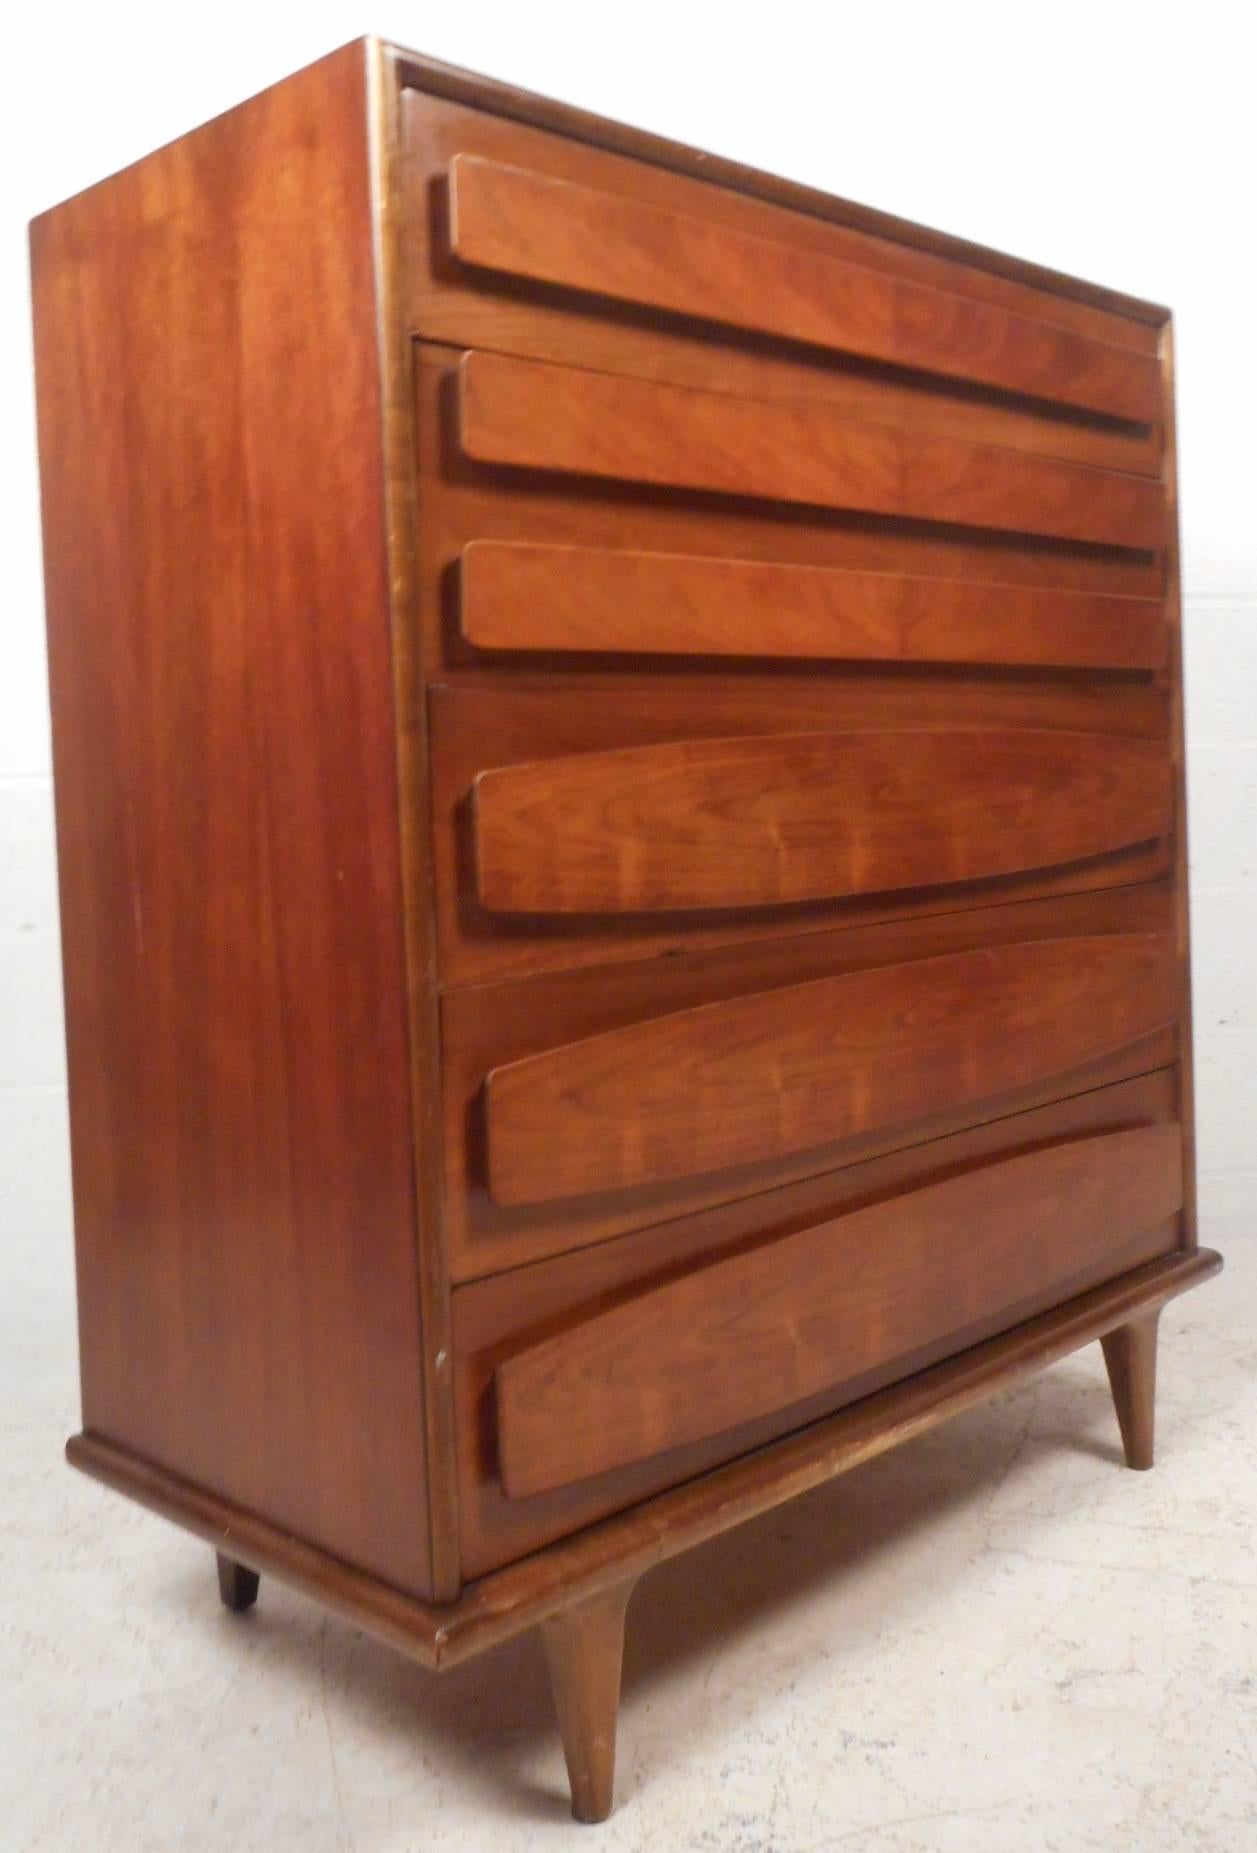 This stunning vintage modern dresser features unique embossed and sculpted drawer fronts that function as pulls. Sleek design with beautiful walnut wood grain and tapered legs. Dresser is made with true quality craftsmanship and offers plenty of